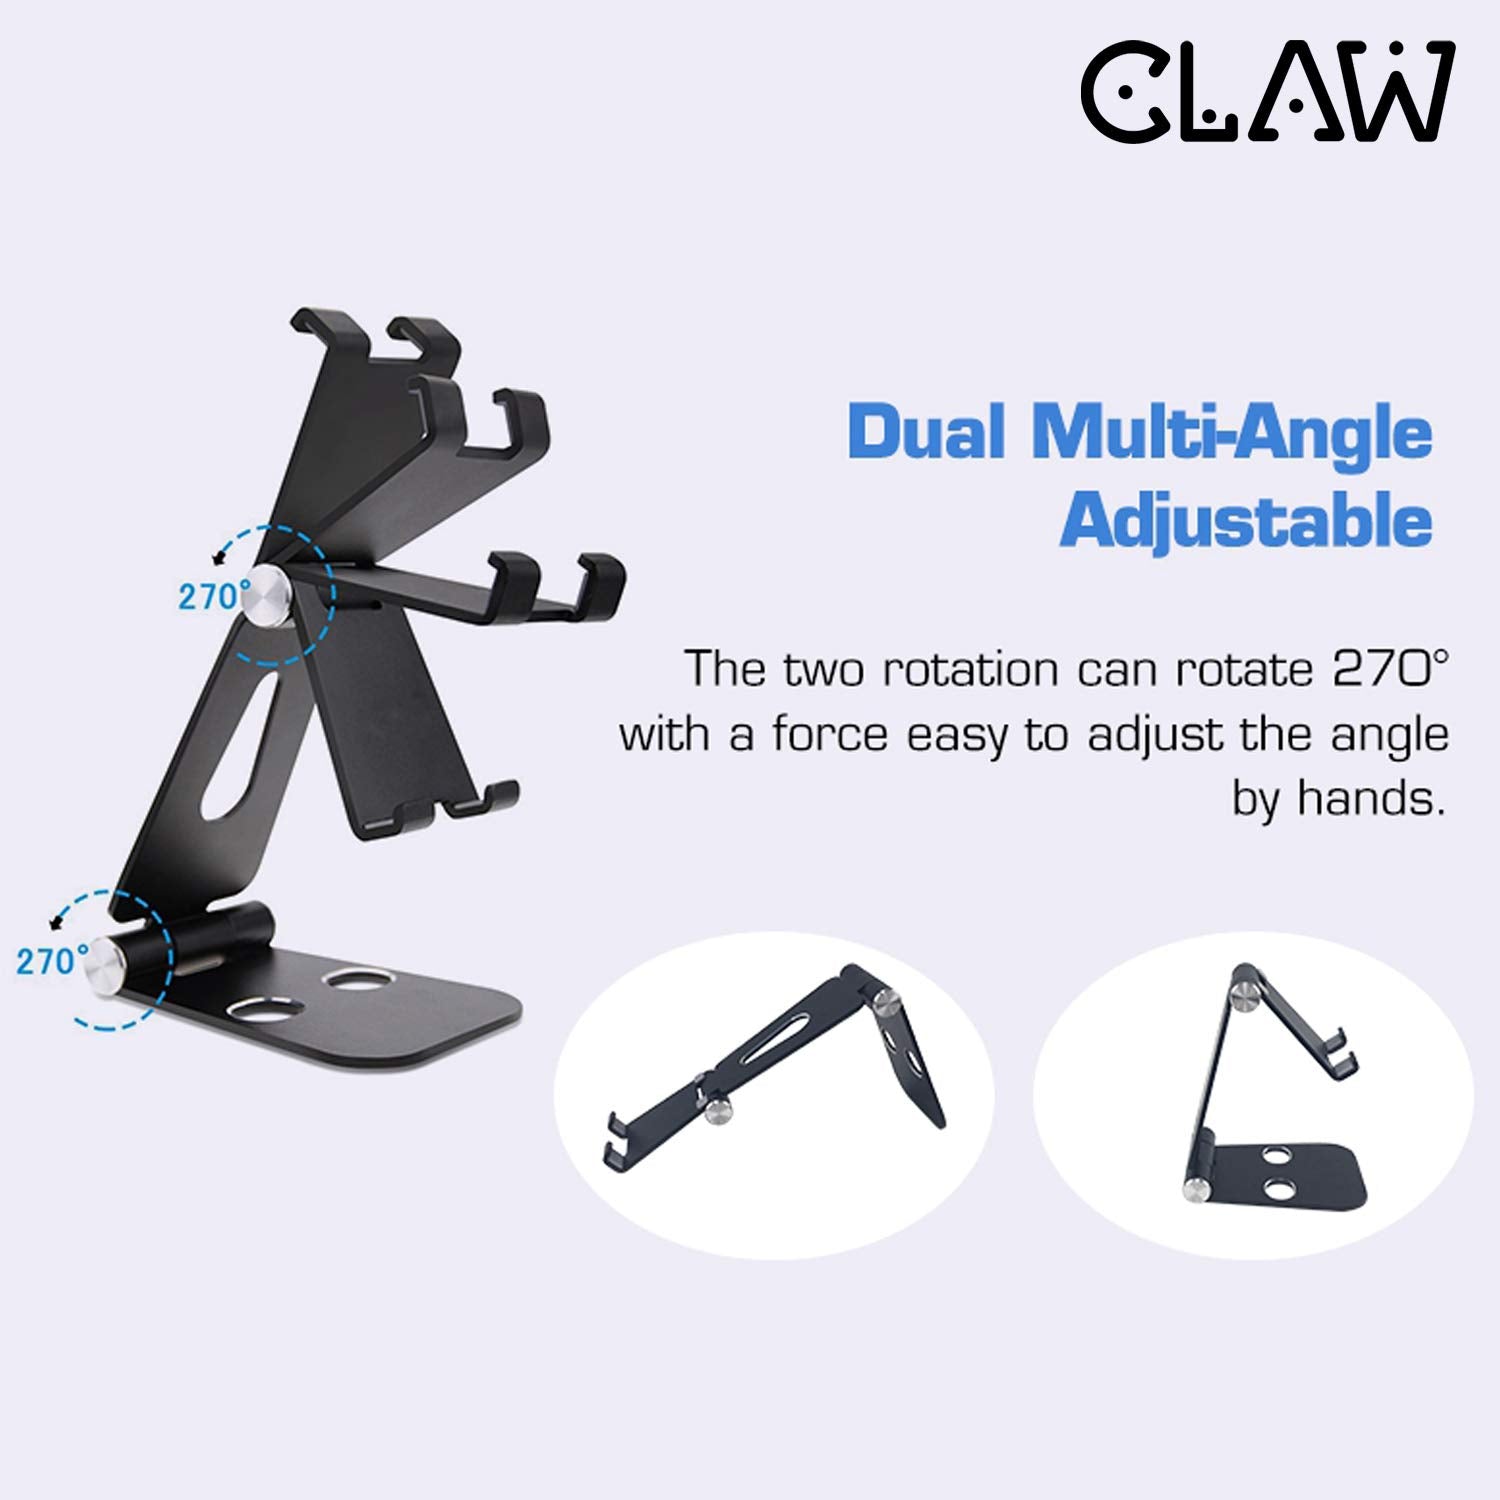 CLAW Portable Mobile and Tablet Stand (Black)